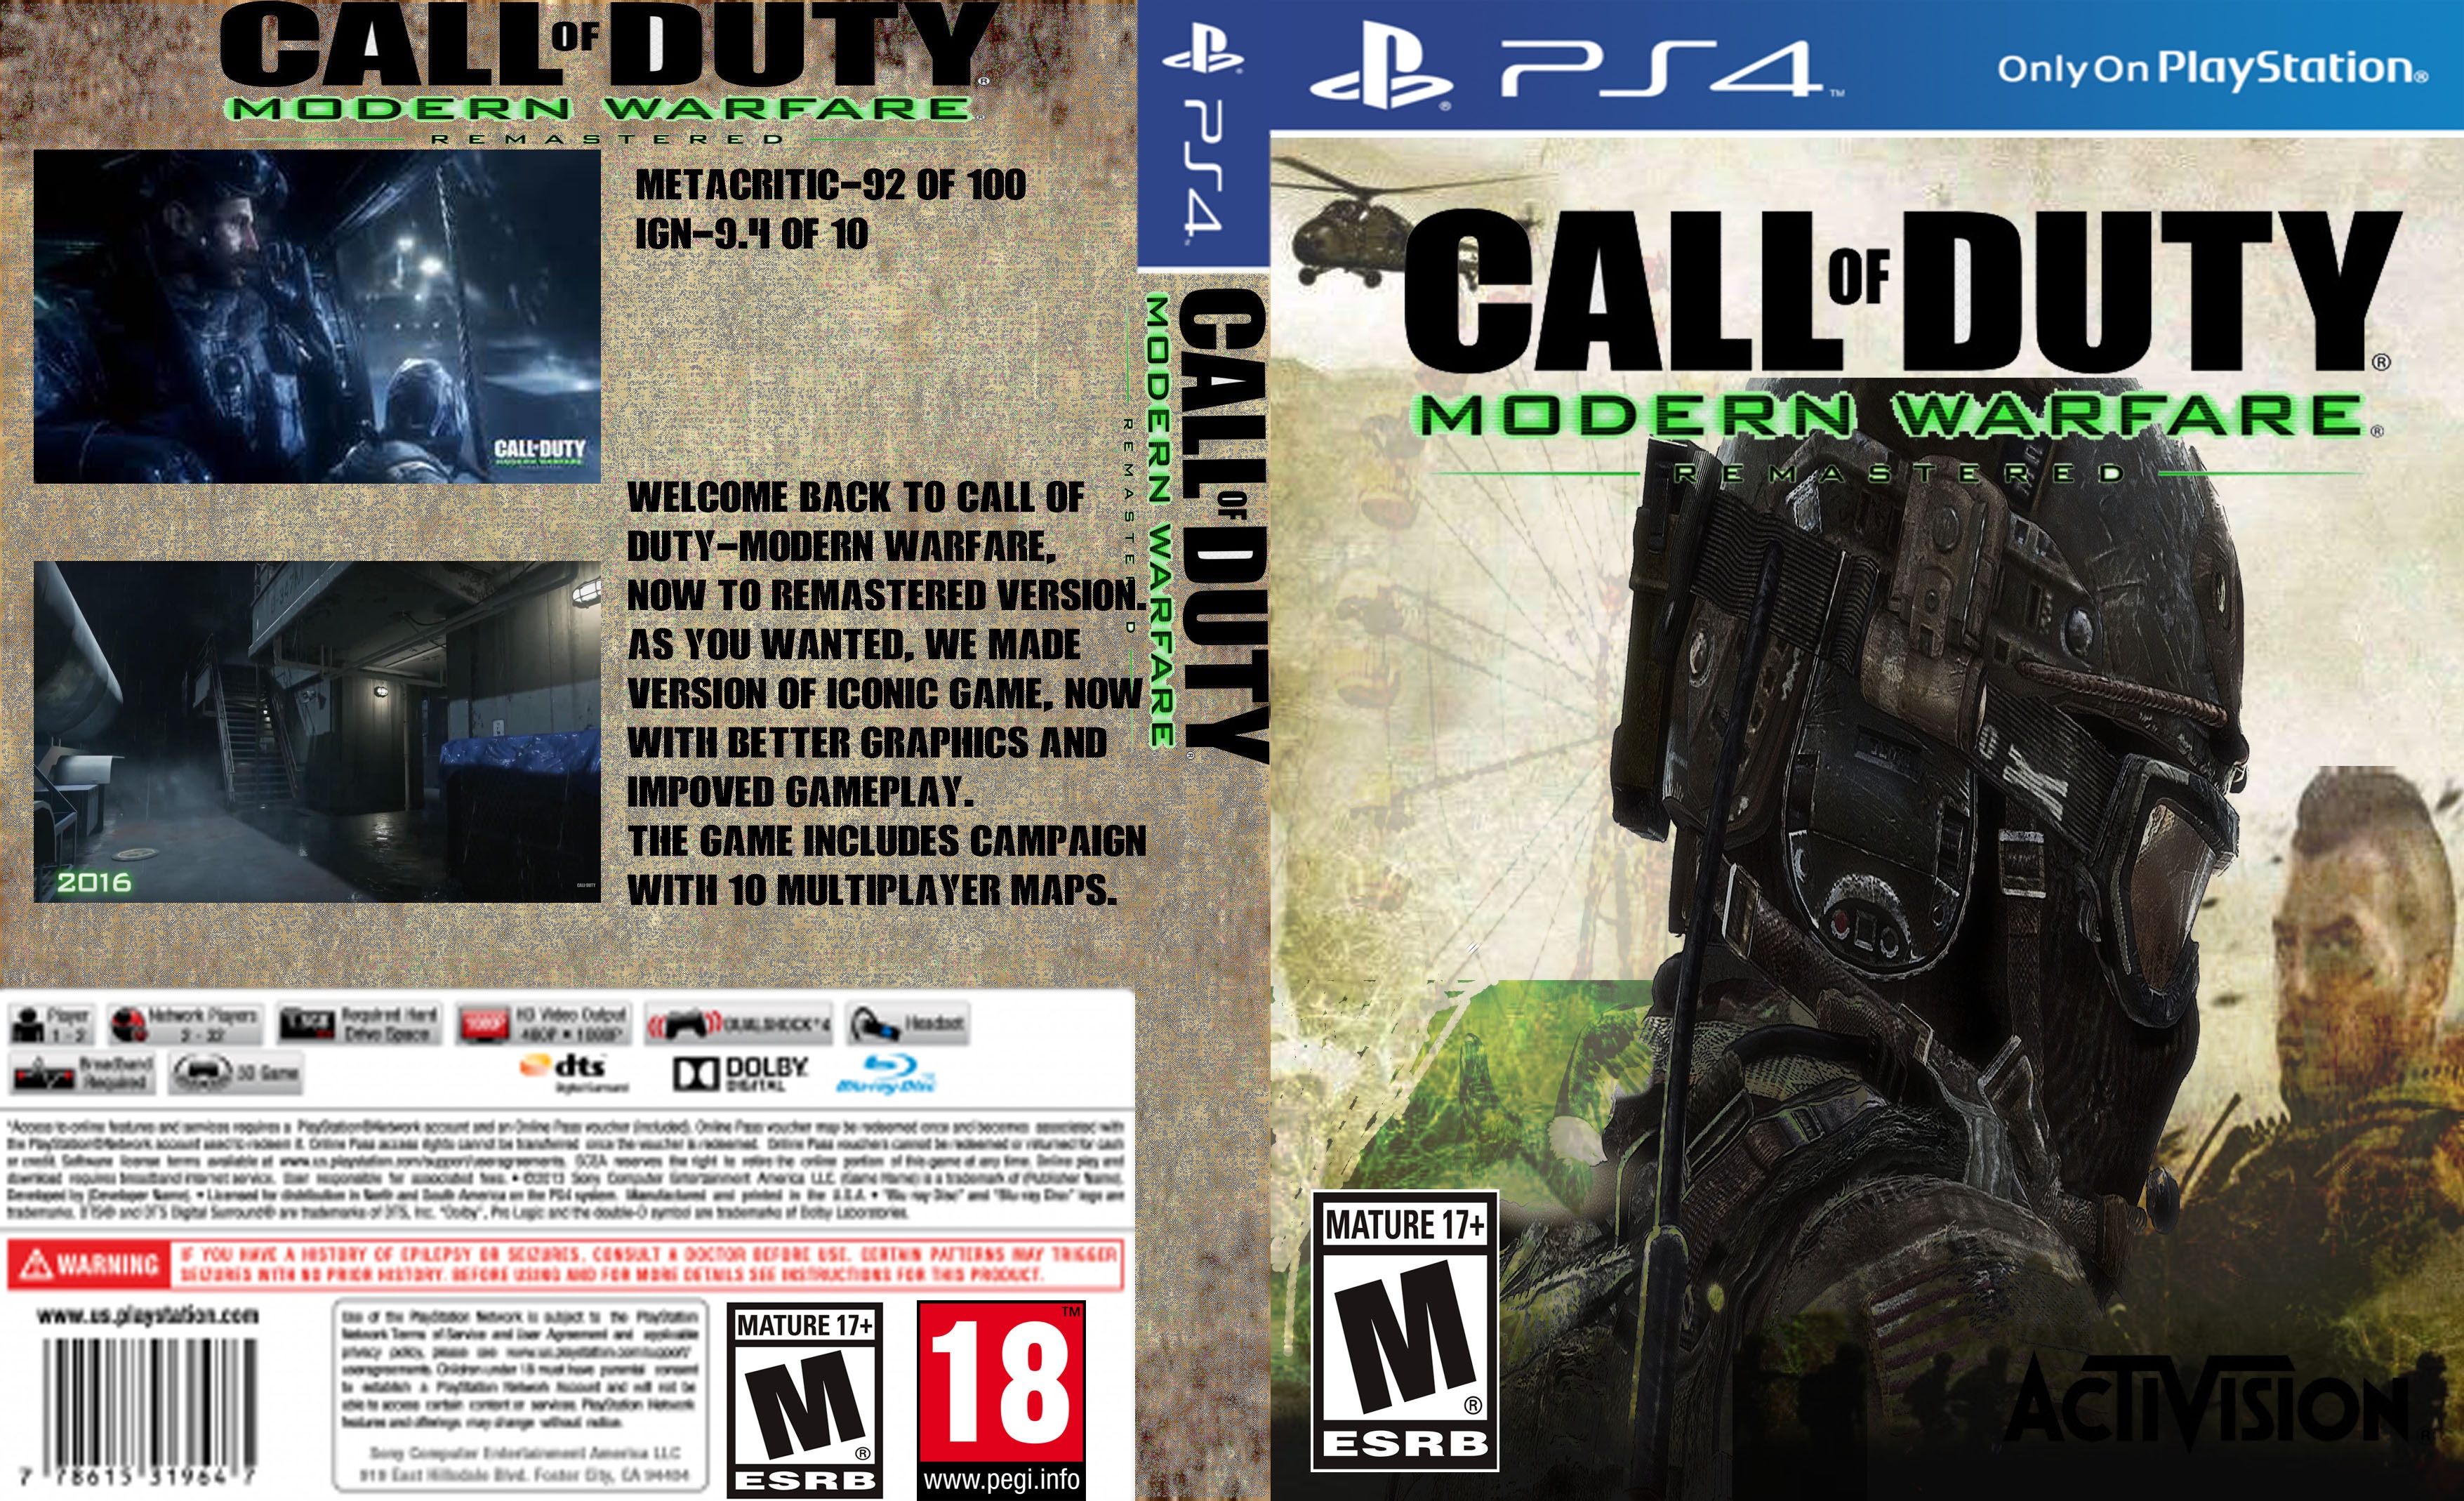 Call of duty remastered ps4. Call of Duty Modern Warfare Remastered диск. Call of Duty Modern Warfare пс4. Call of Duty: Modern Warfare PLAYSTATION 4 диск. Call of Duty 4 Modern Warfare ps4.